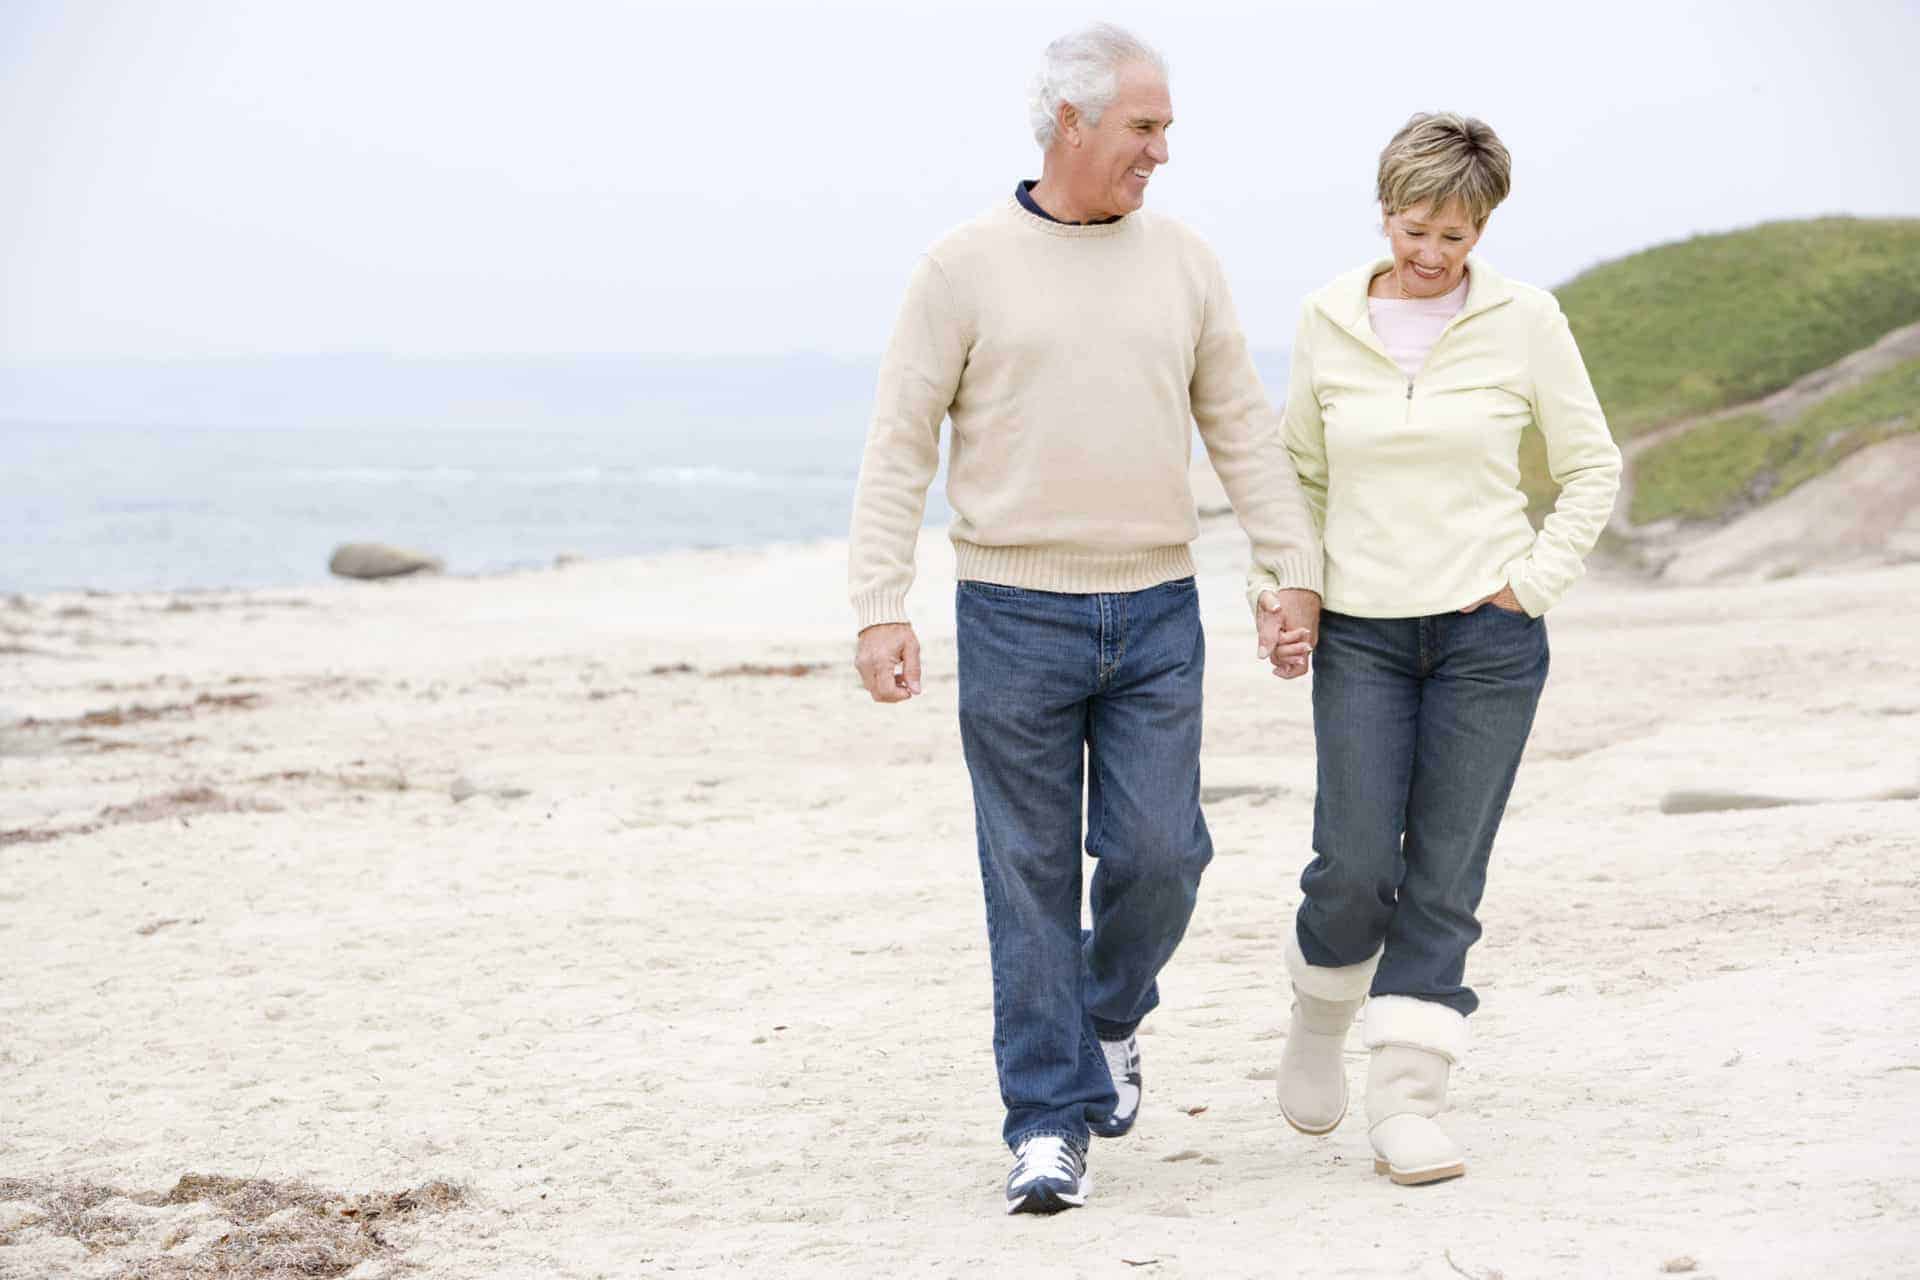 A mature couple walking on a beach holding hands.